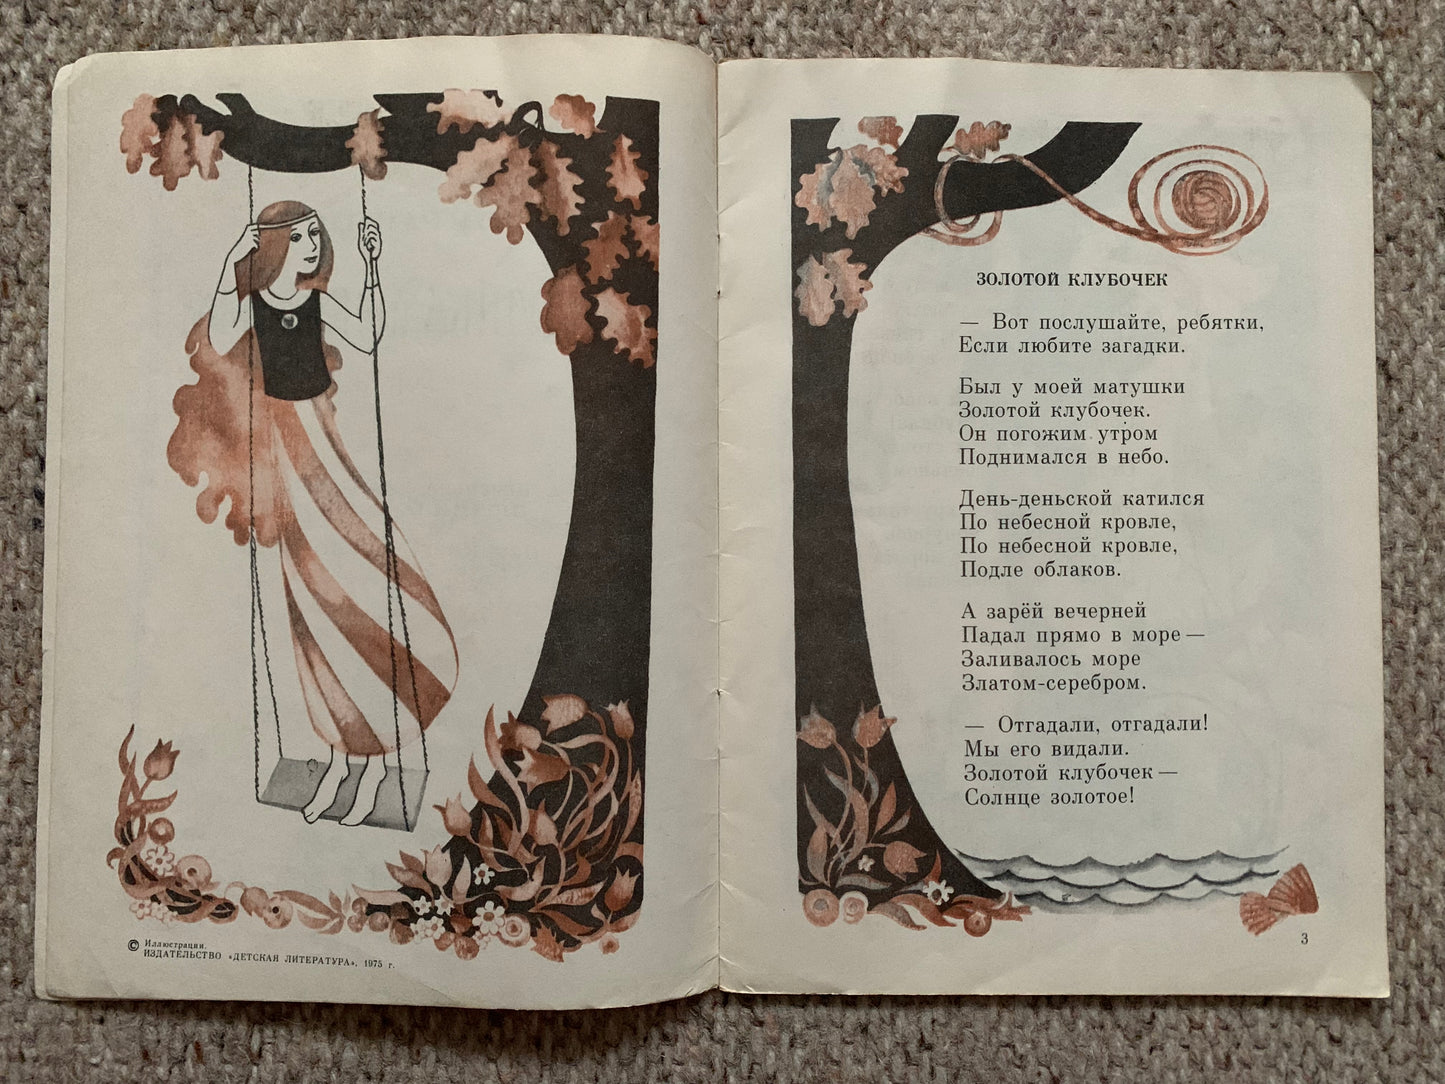 Vintage Russian Children's Book by Jan Rainis - ДЕДУШКА и ЯБЛОНЬКИ - GRANDPA and APPLE-TREES - Printed in USSR - 1975